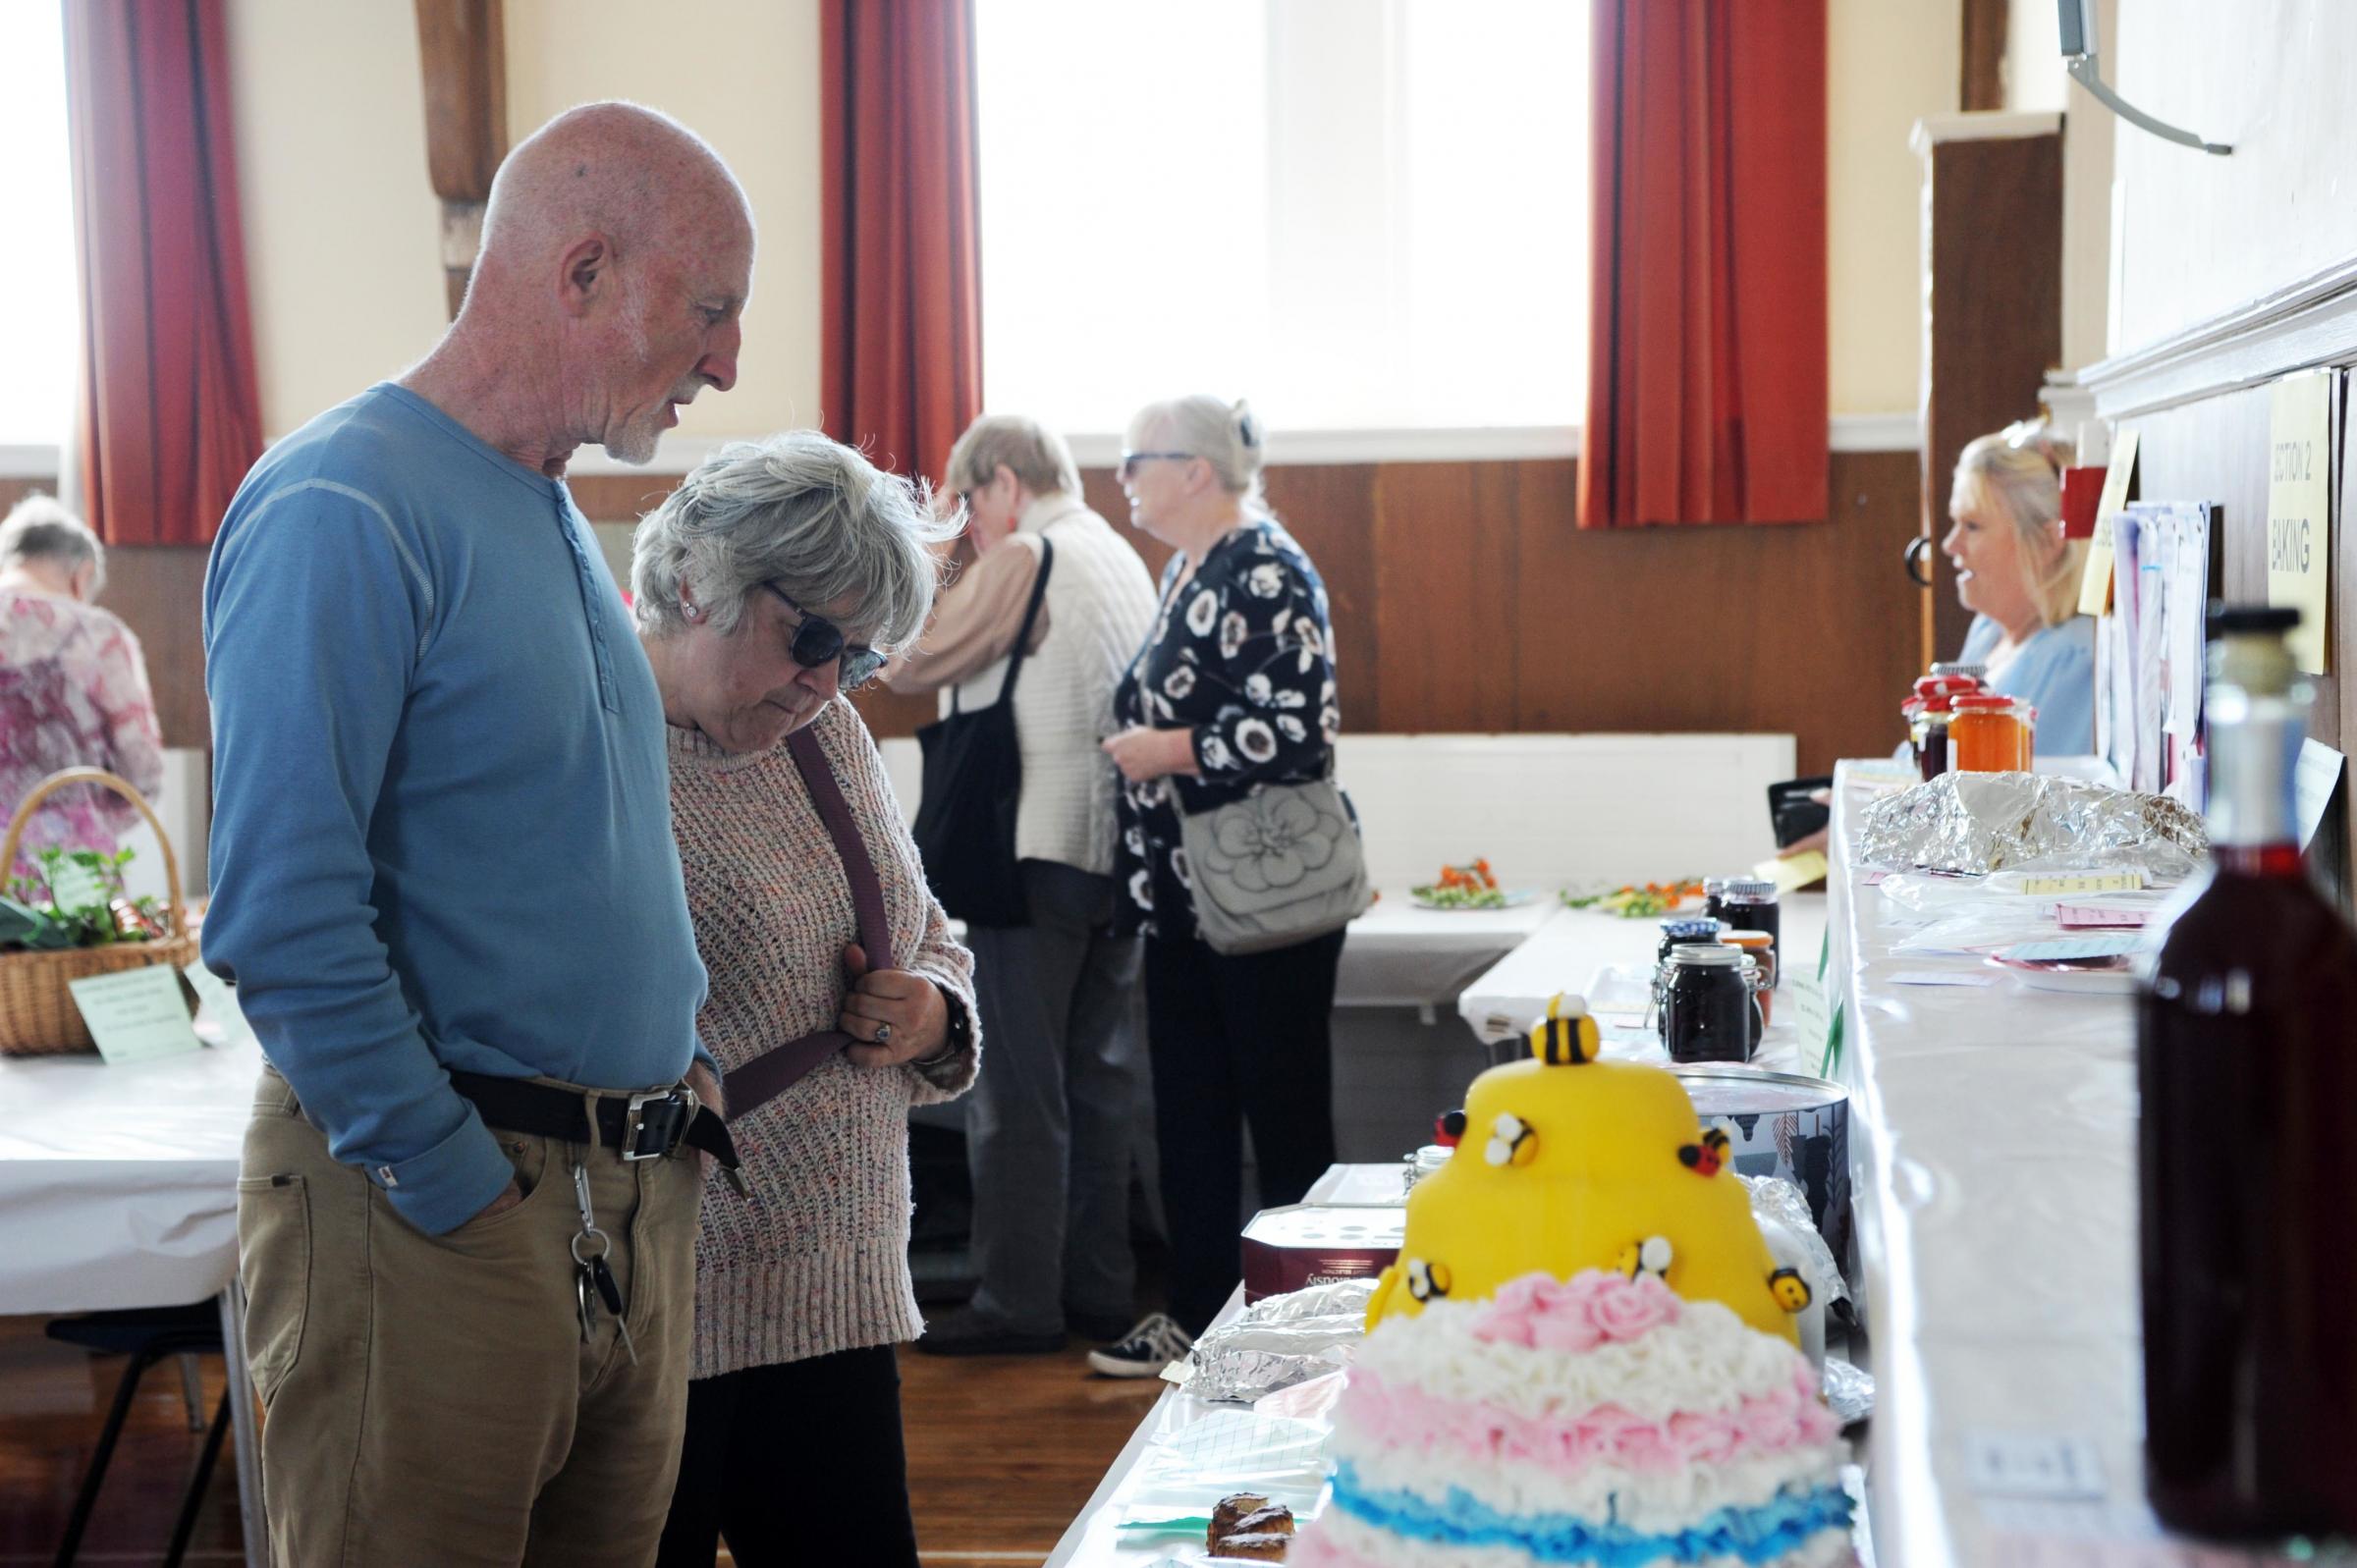 Kilwinning Horticultural Societys annual show on Thursday, August 25 (Photo - Charlie Gilmour)